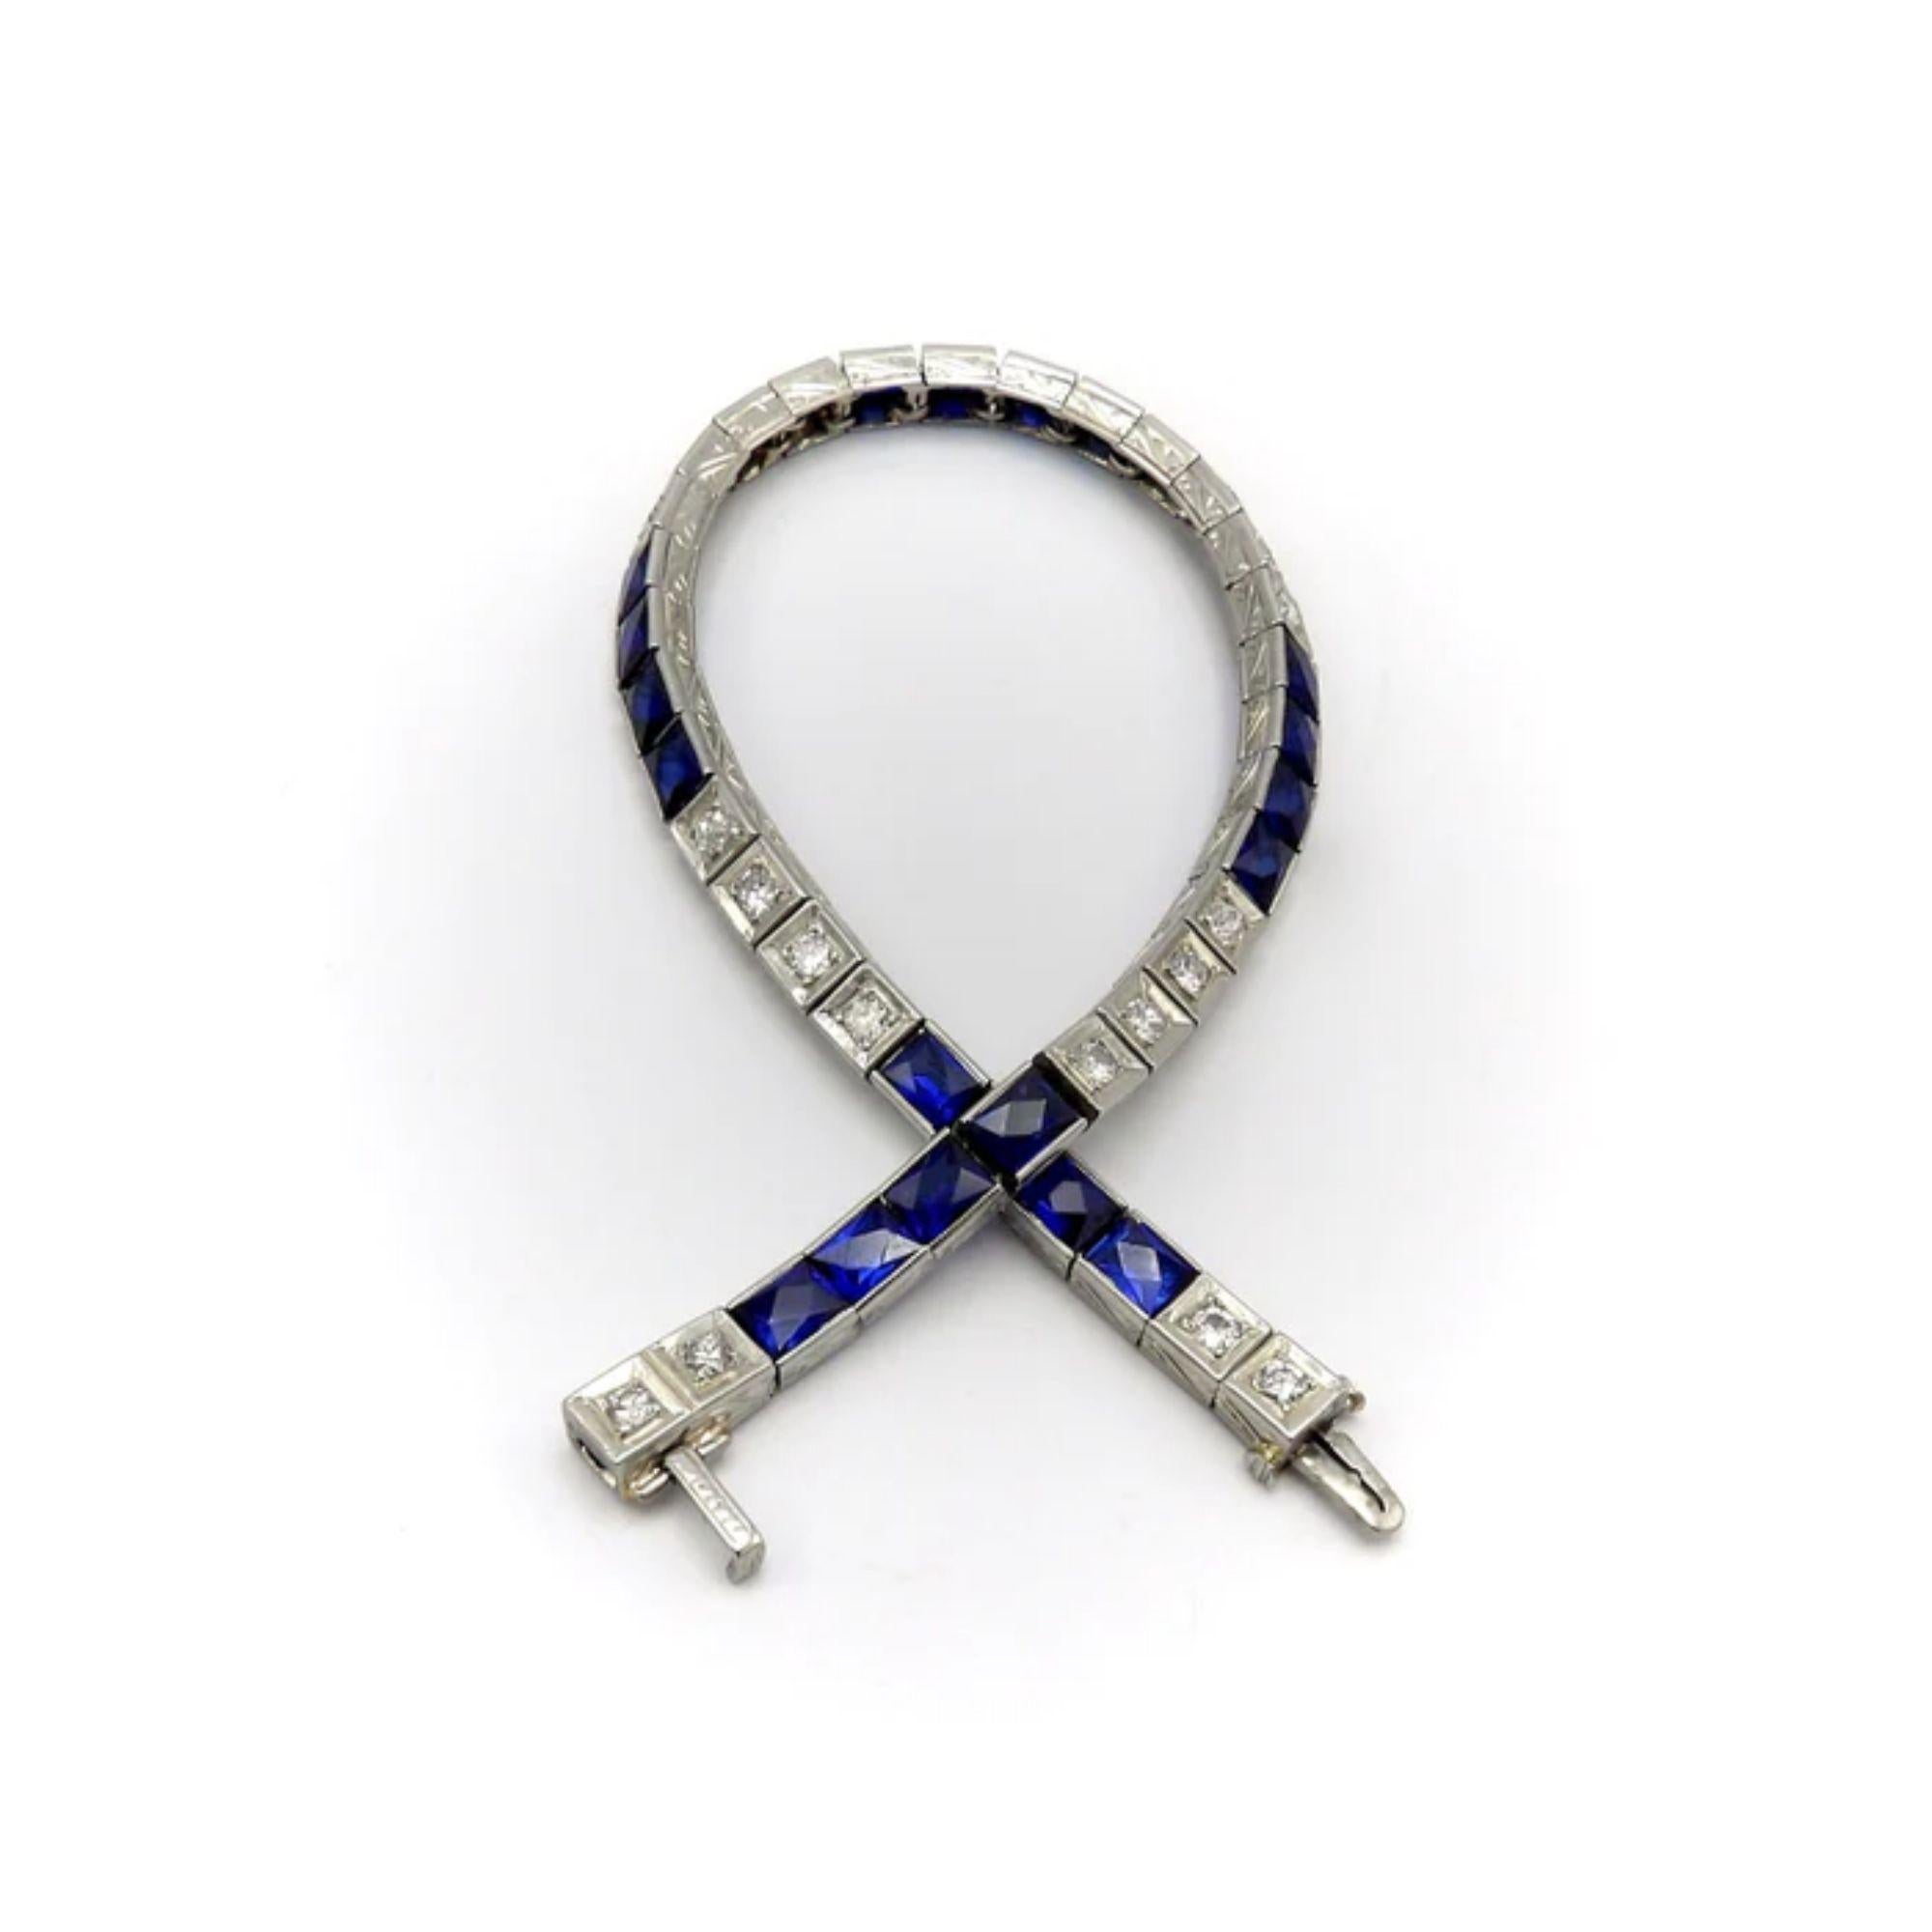 A classic line bracelet from the Art Deco era. Made of 18K white gold, this stunning piece features an alternating pattern of sparkling diamonds and synthetic deep blue sapphires.

Each of the 20 diamonds is micro prong set within an individual box